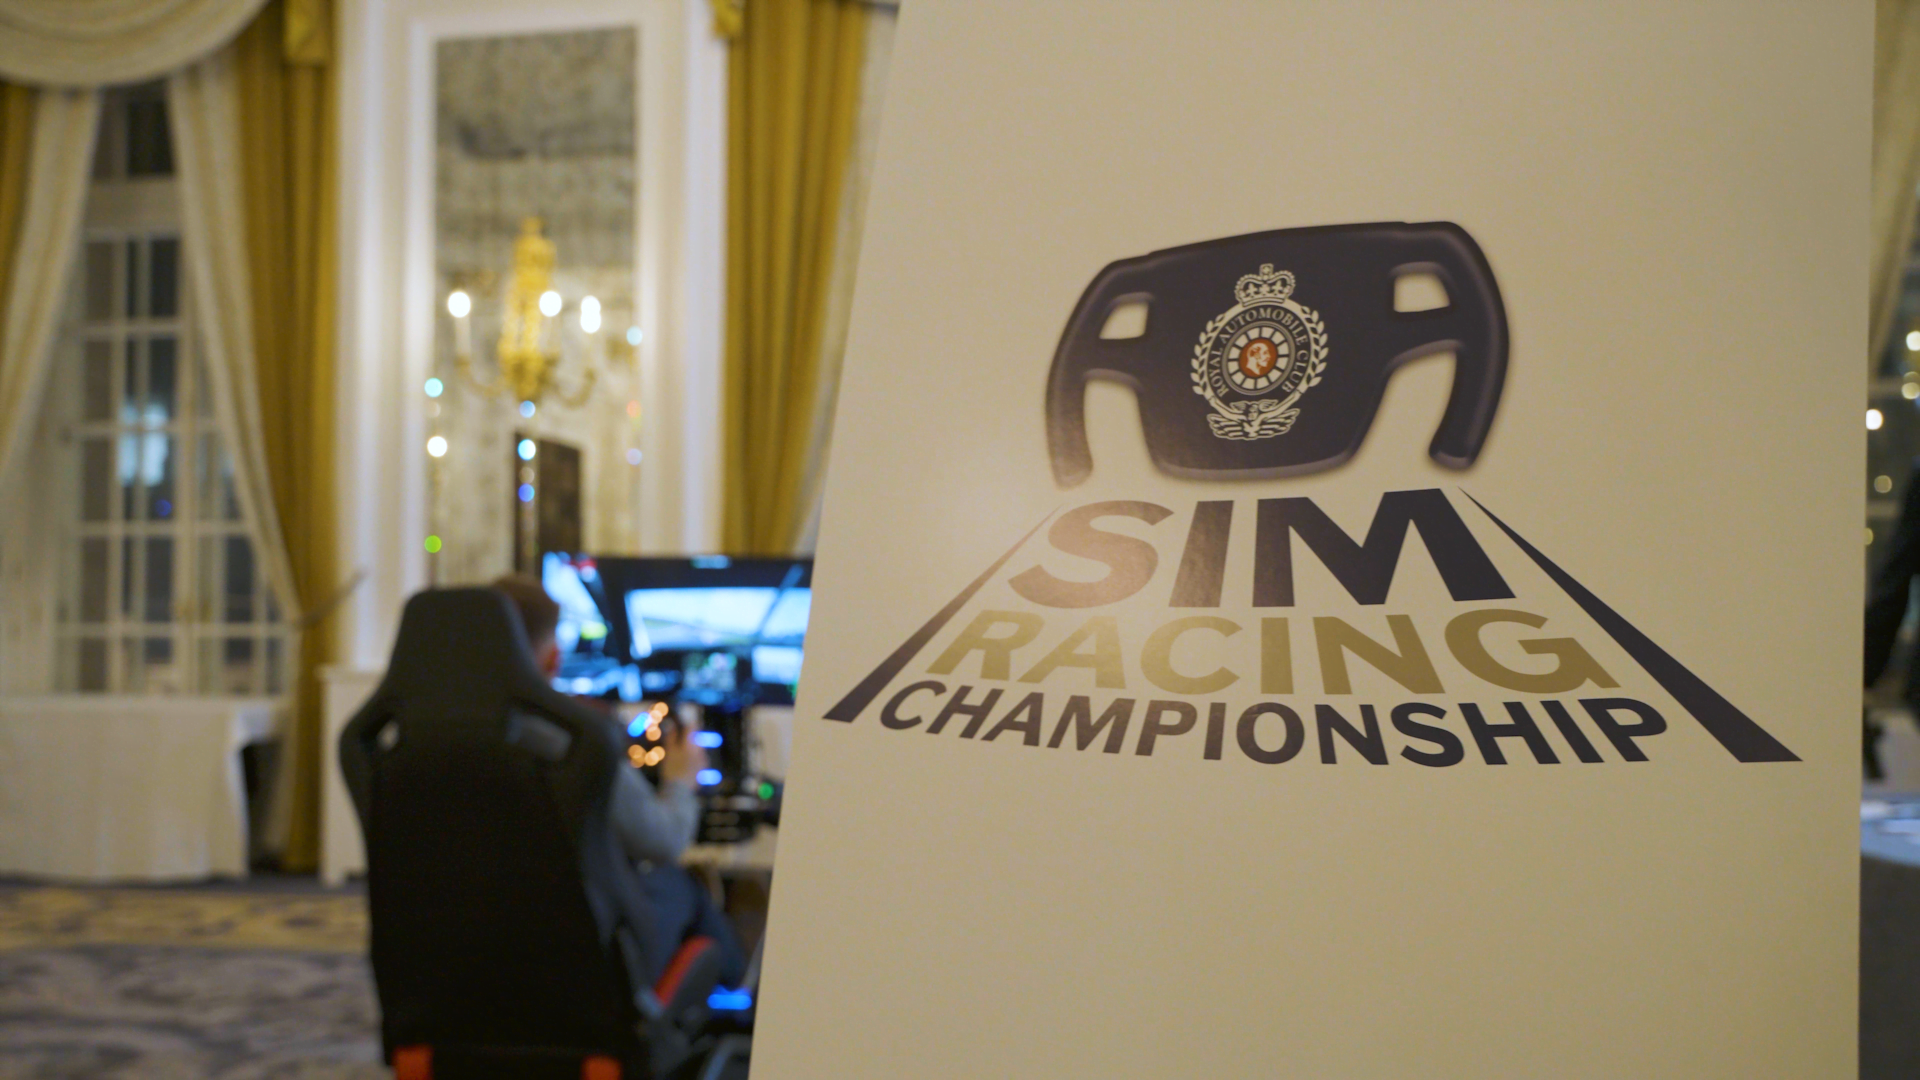 Kimura Performance Showcases Their New Trak Racer SIM at the Royal Automobile Club Events Launch